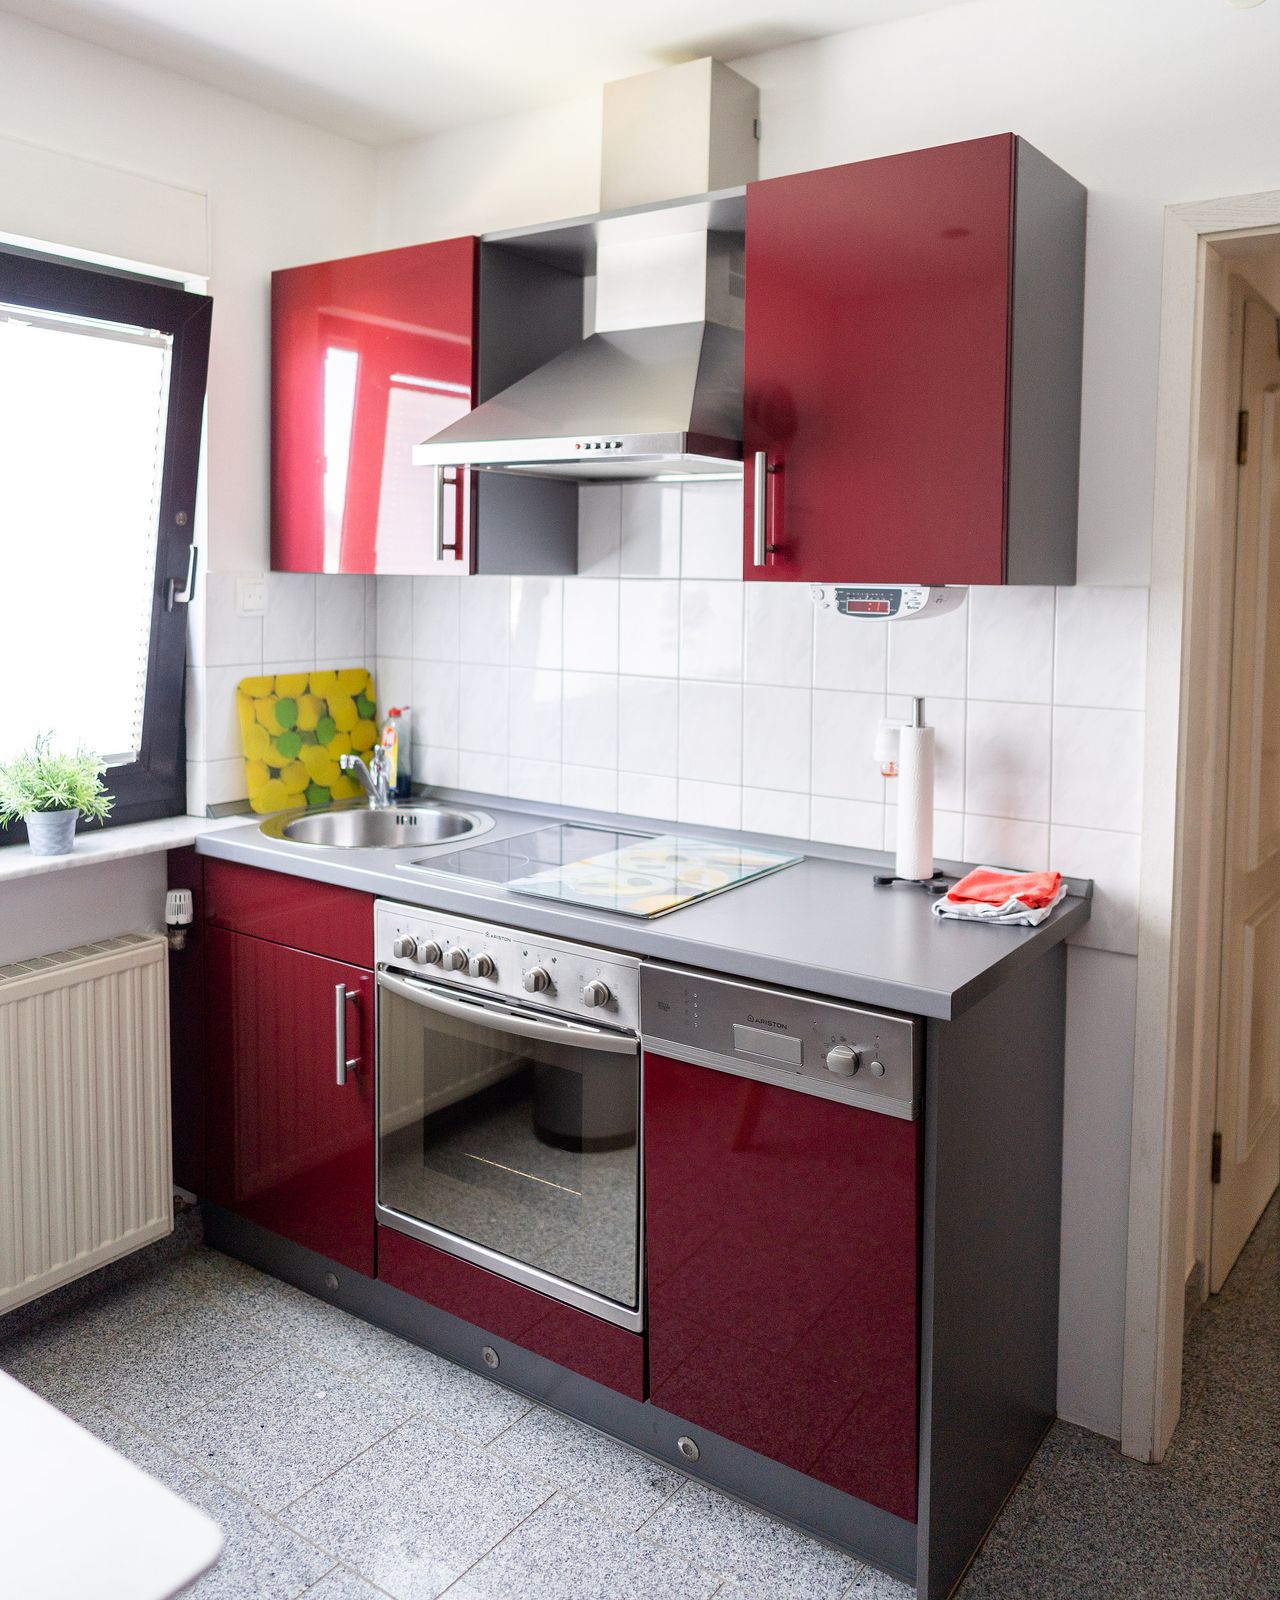 XL Apartment "fully equipped" in Ratingen